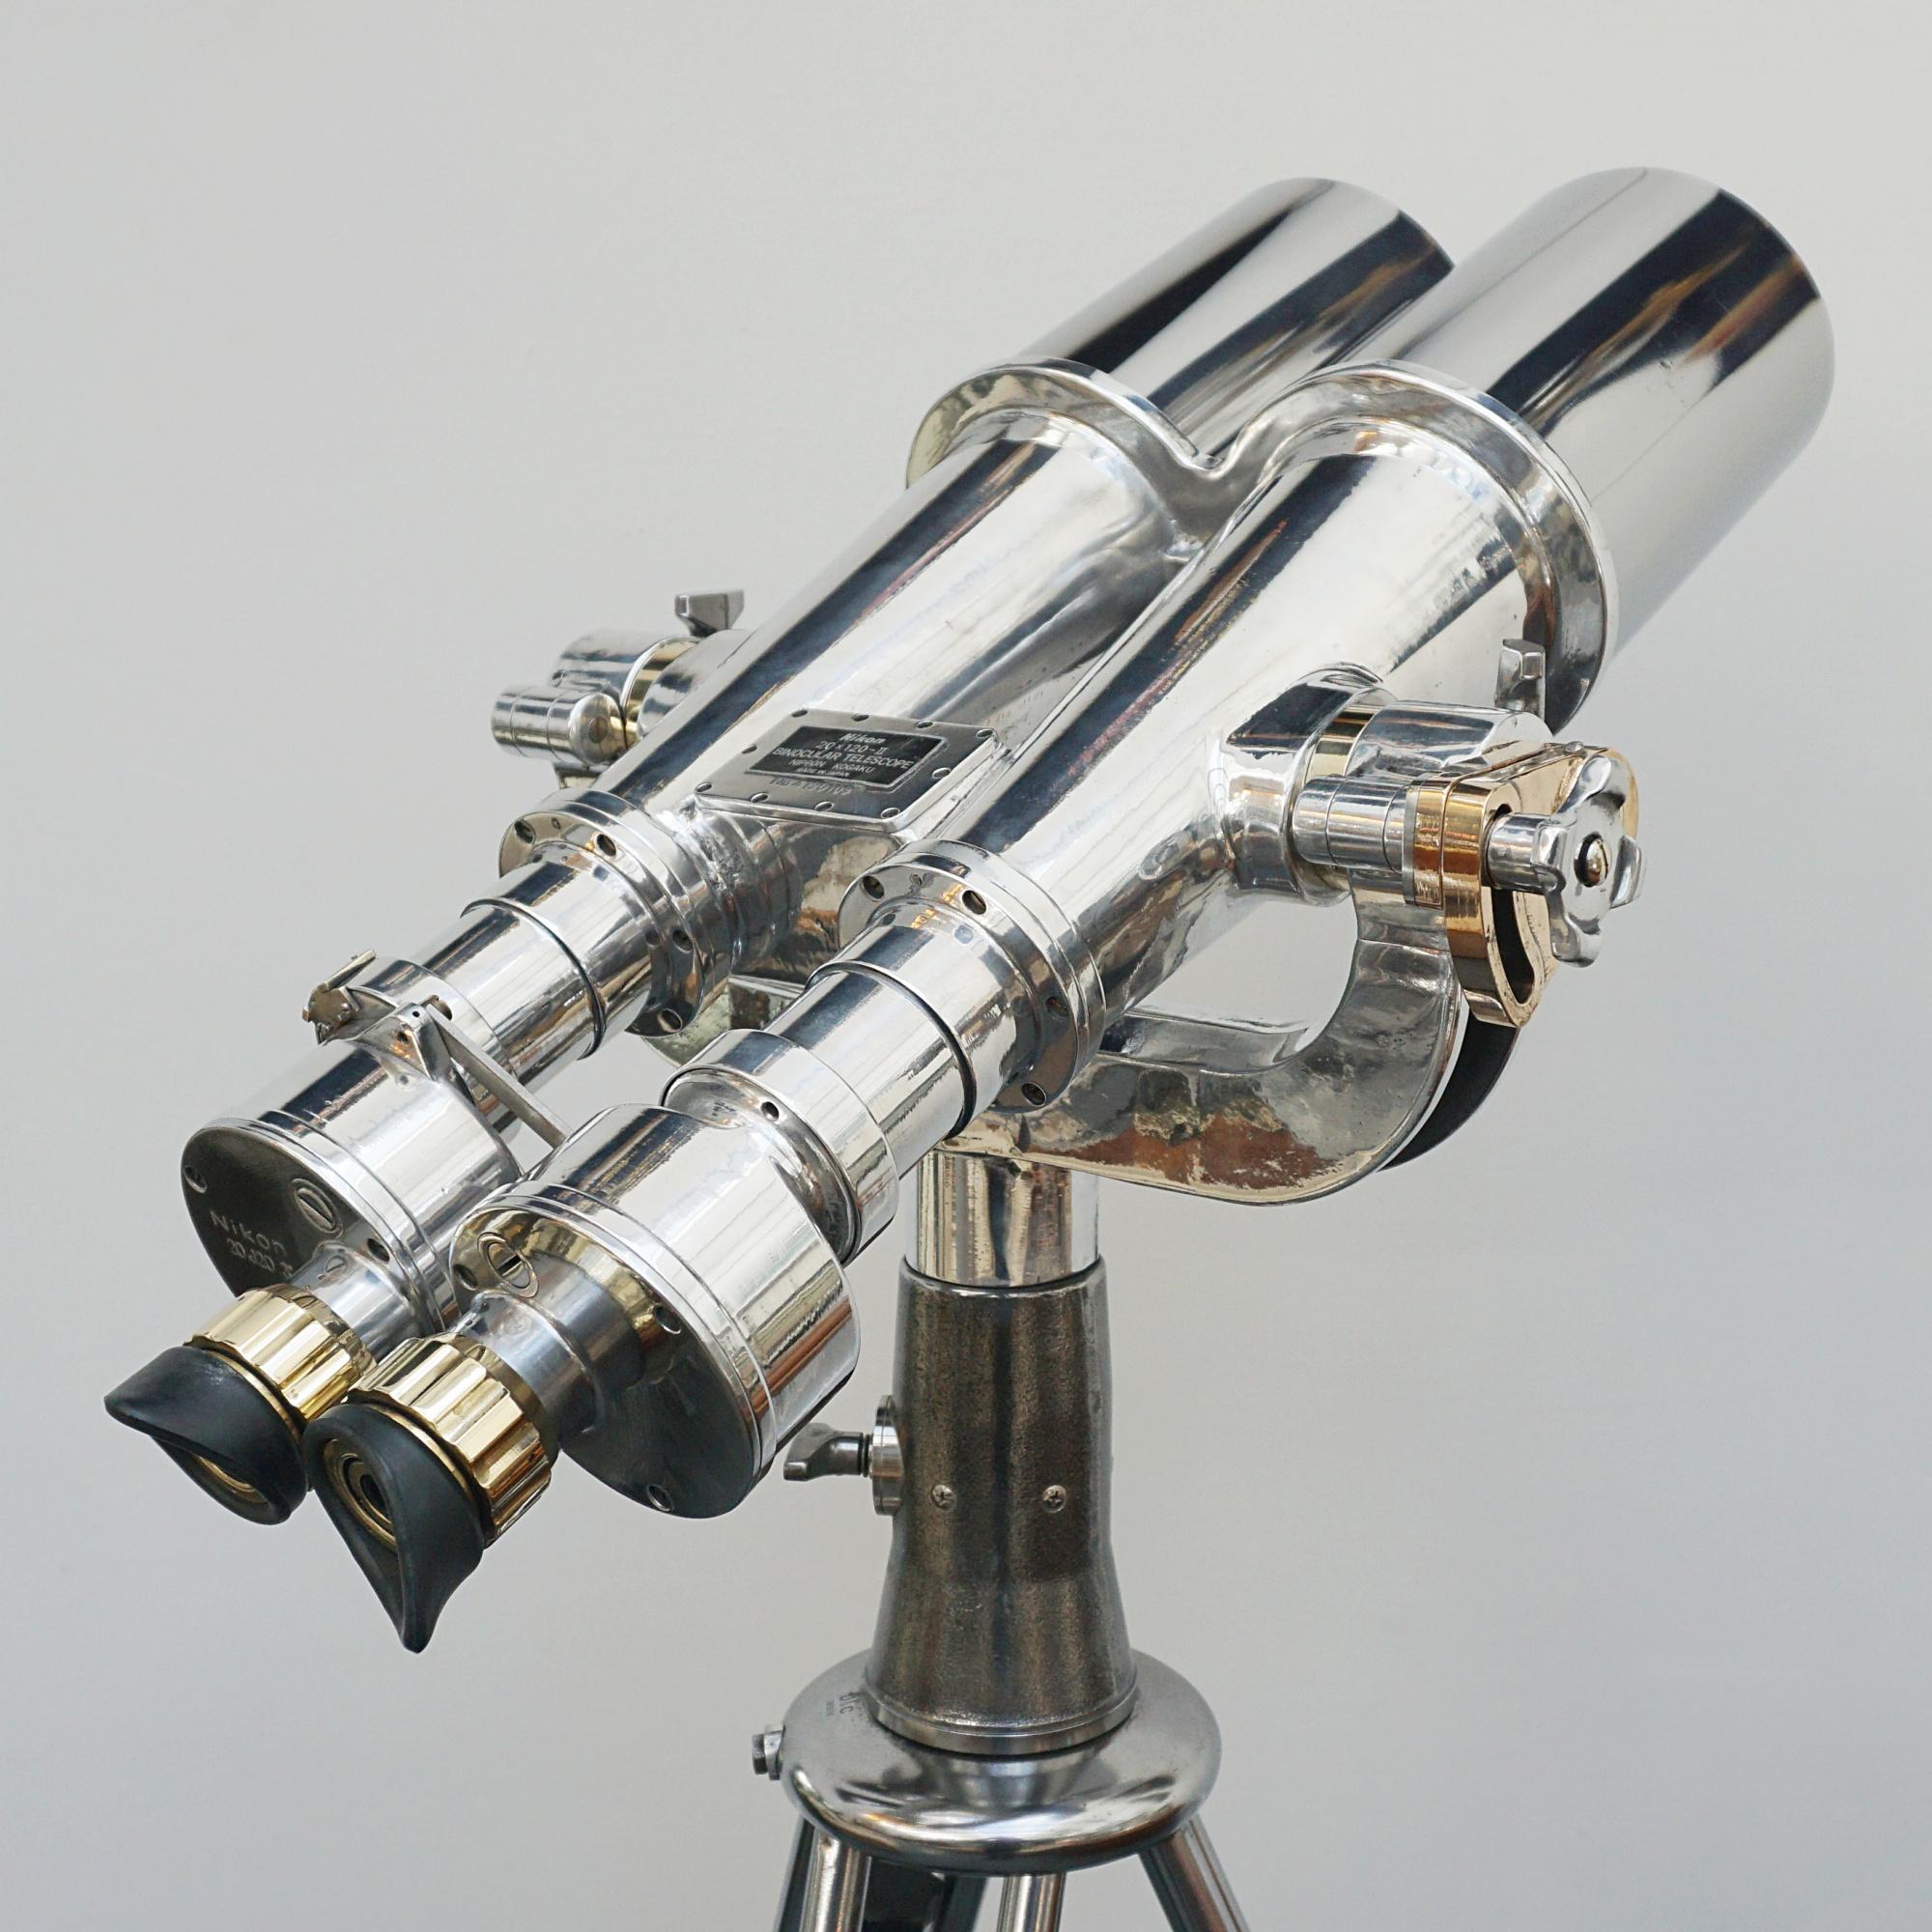 Chromed metal and brass Nikon 20x120 WW11 naval binoculars. Set on a later 1960'\s re-polished metal stand.

20x Magnification with 120mm objective lenses. Paint stripped and metal polished. Optics fully refurbished.

Dimensions: H 15cm W 47cm L